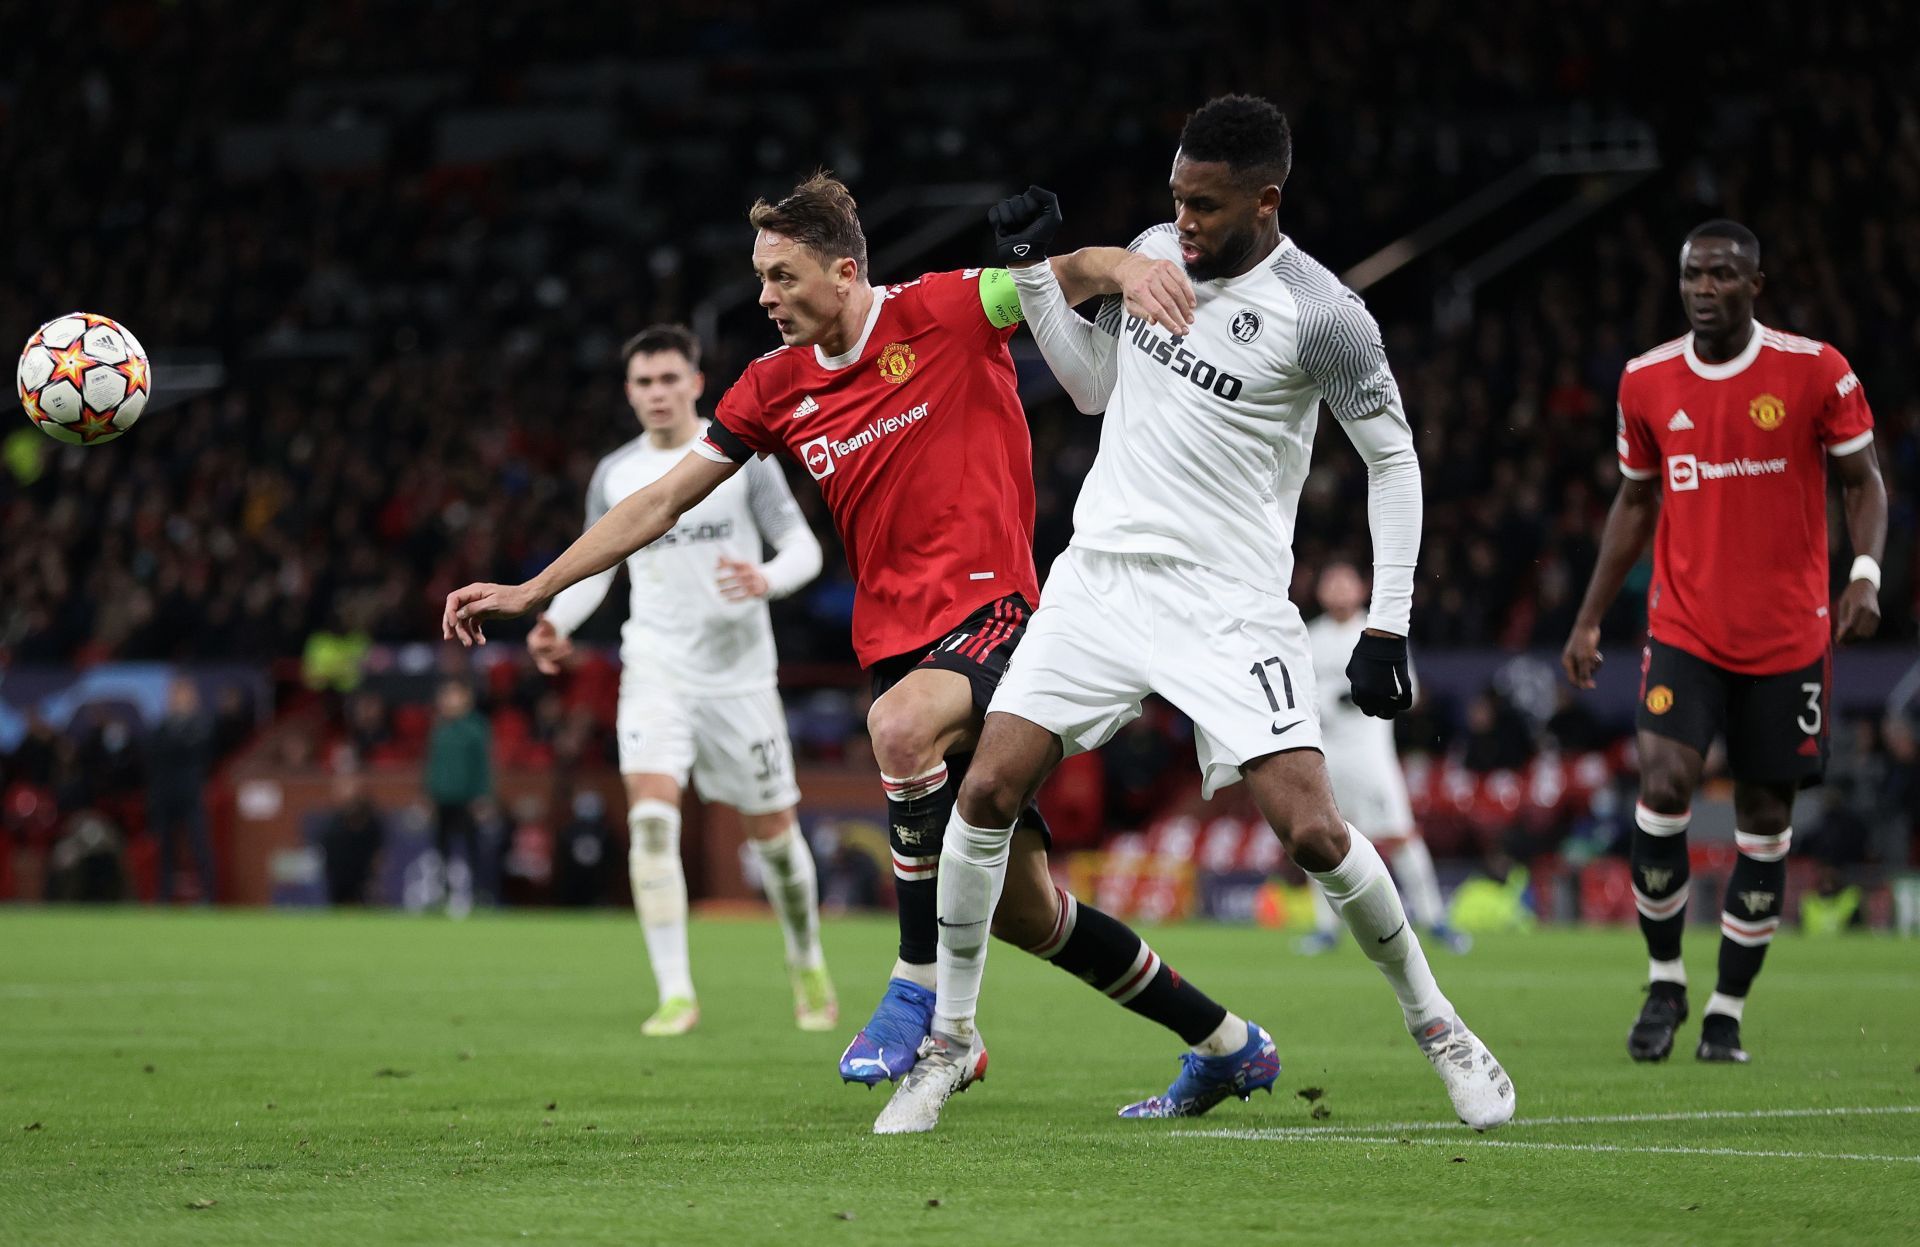 Manchester United and BSC Young Boys played out a 1-1 draw on Wednesday.